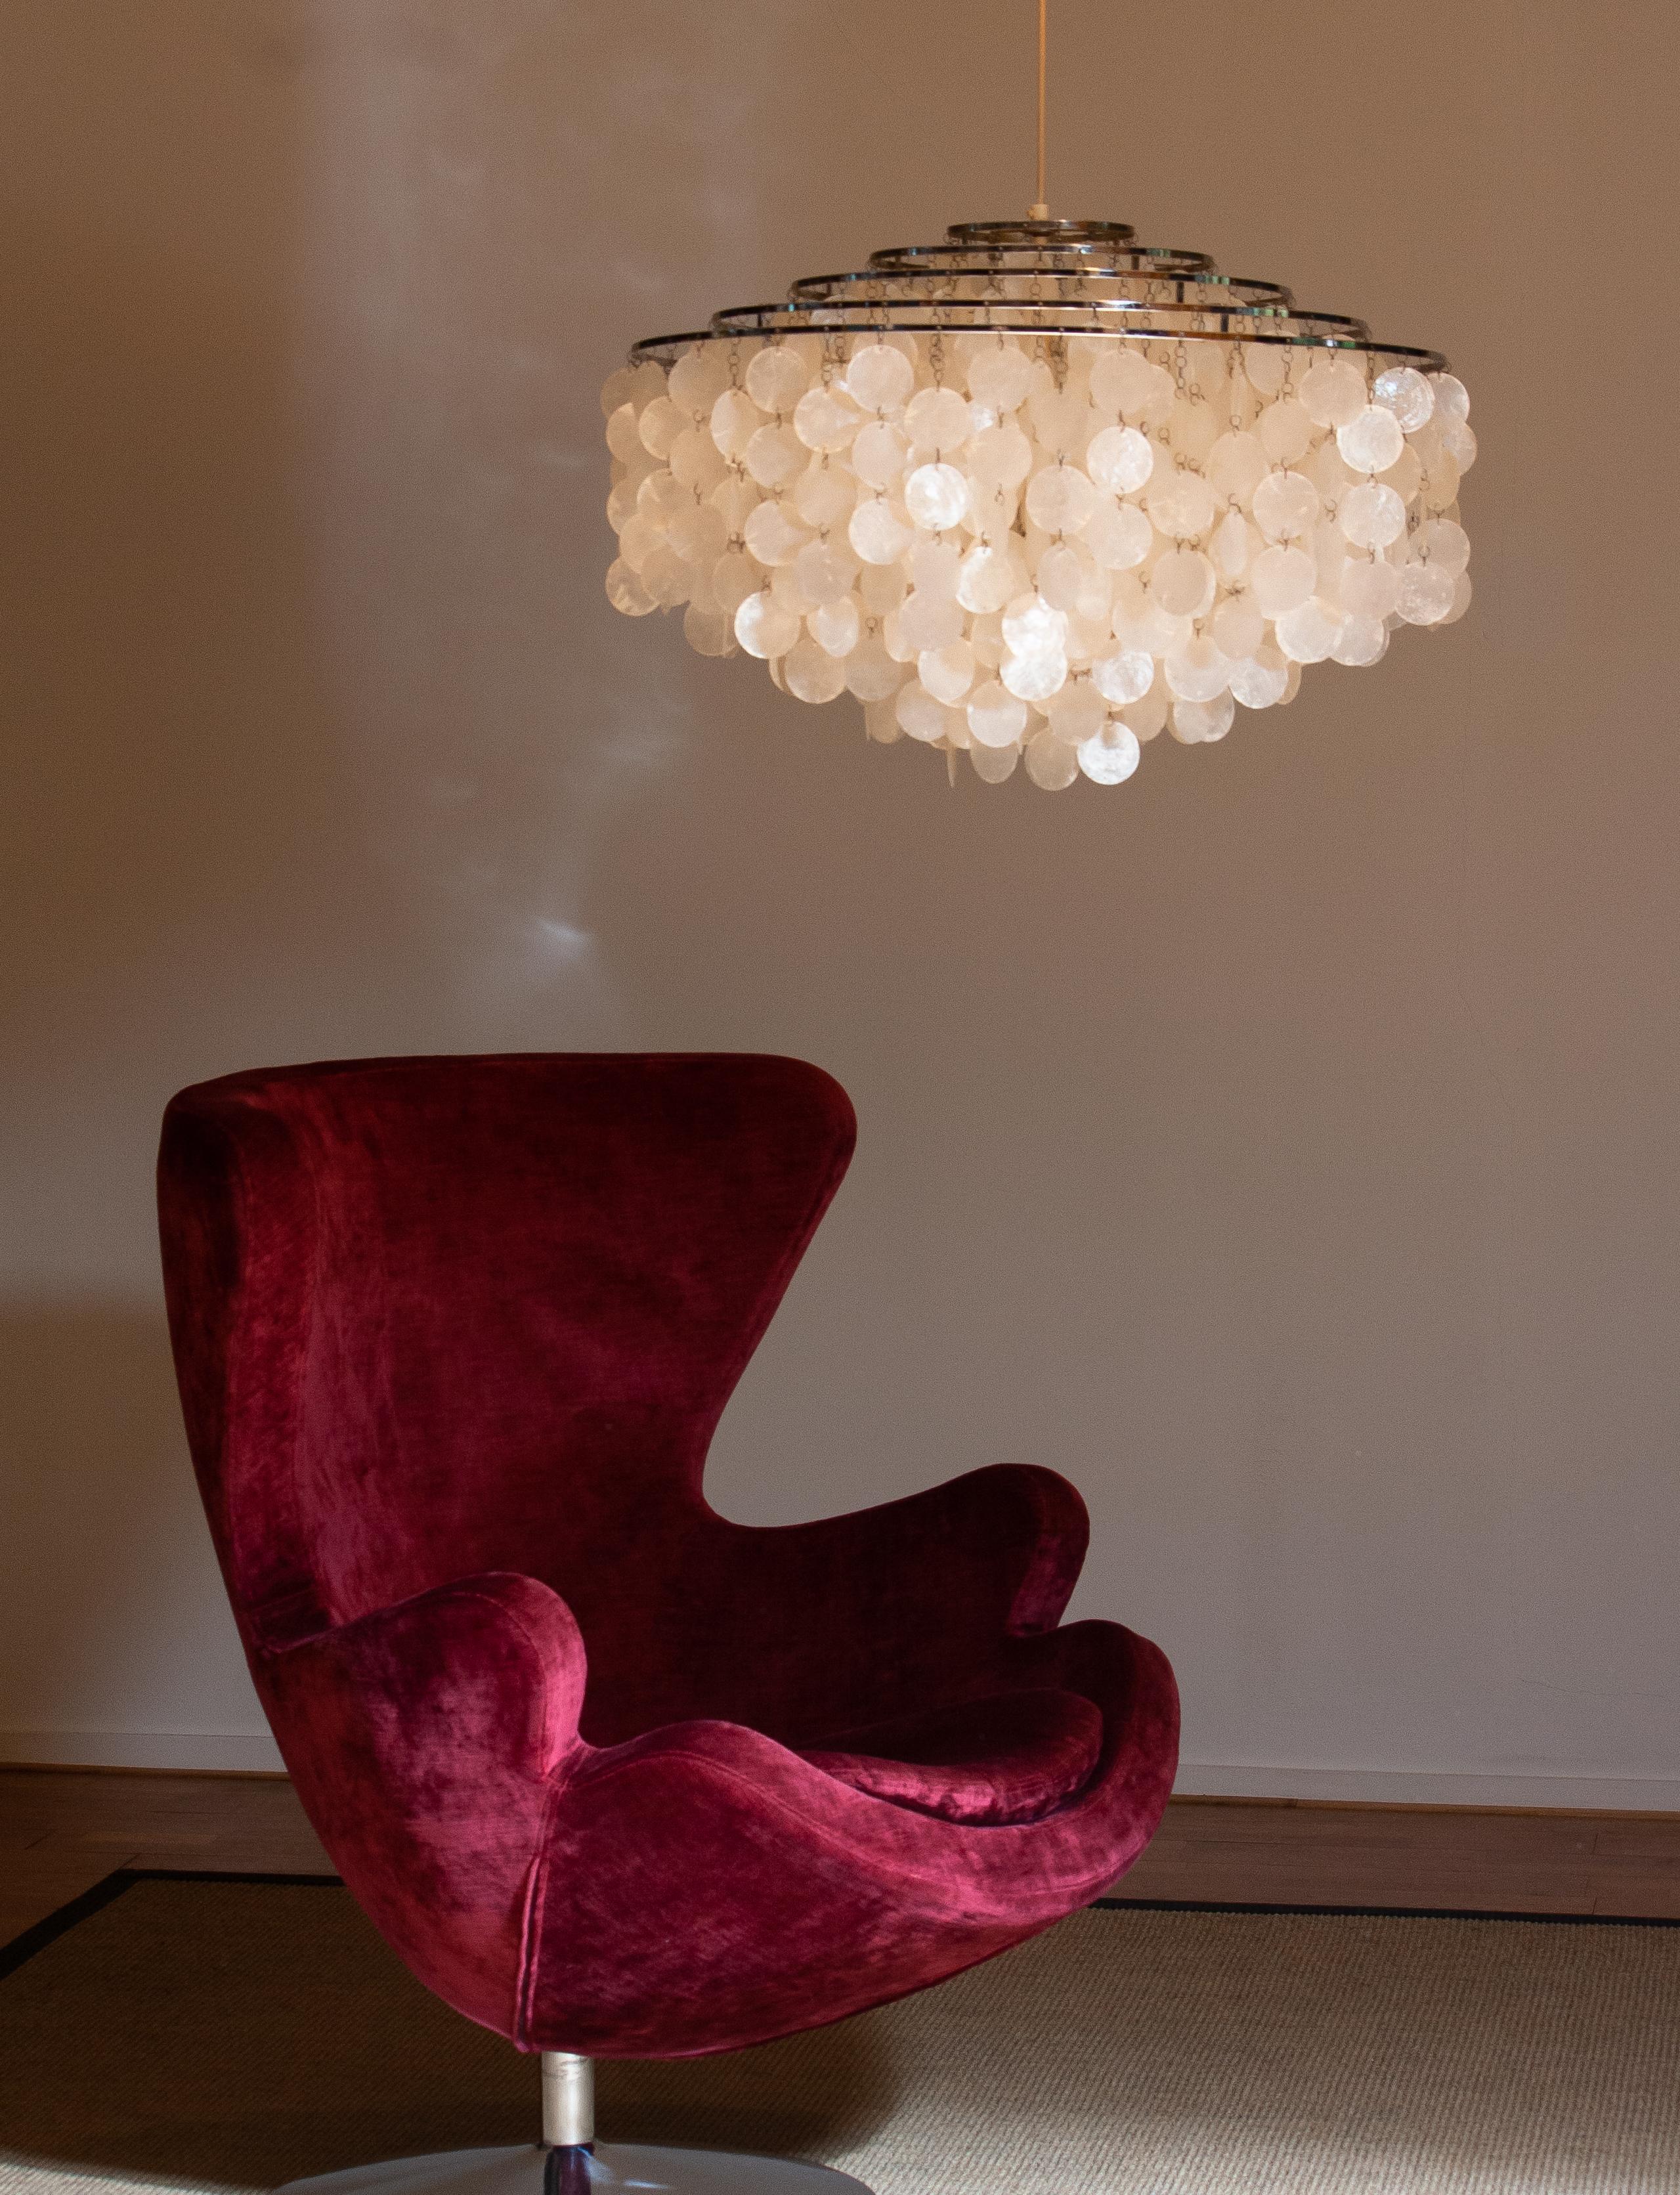 1960s, Extra Large Capiz Shell Chandelier by Verner Panton for Luber Ag, Swiss 3